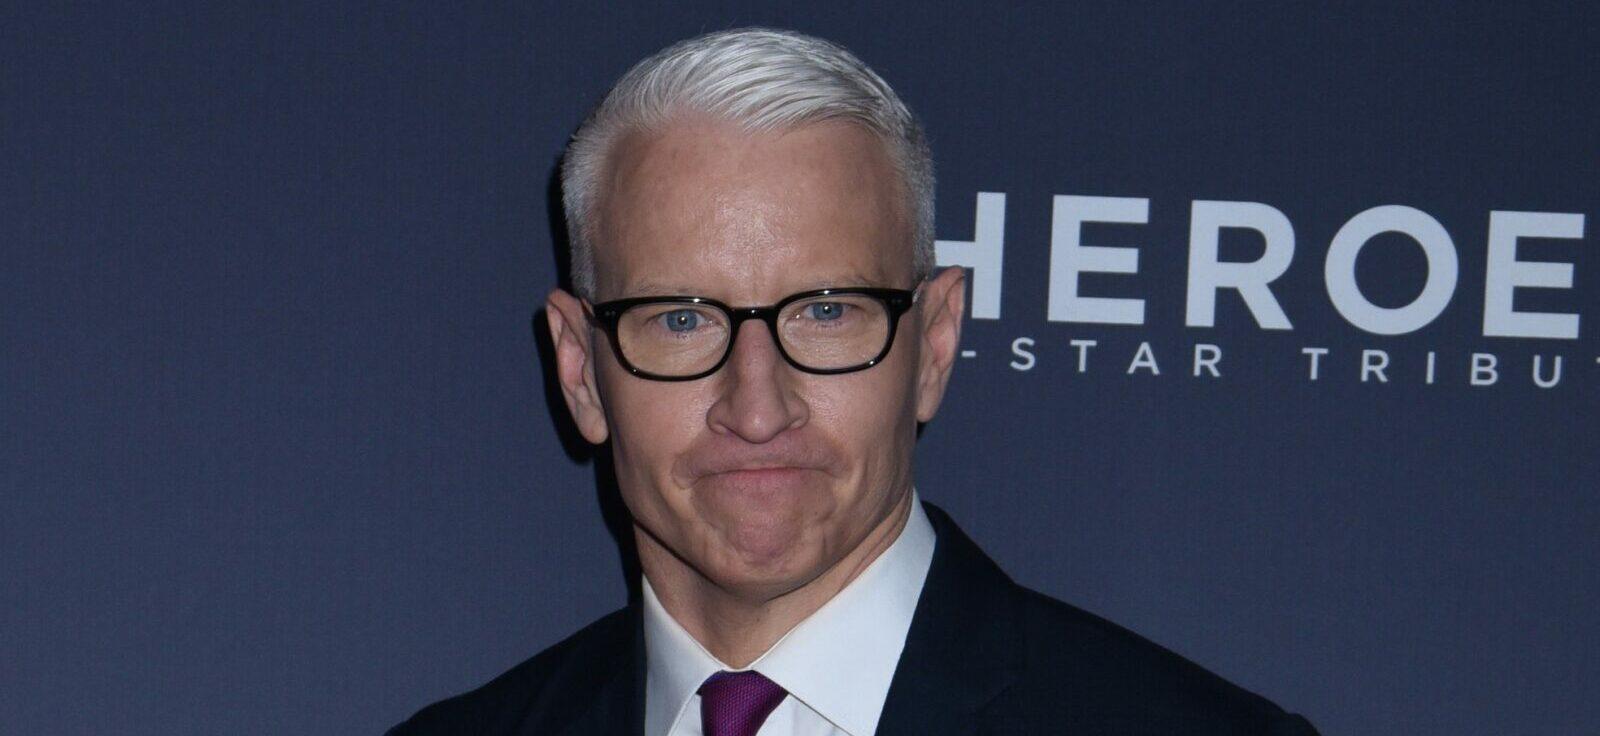 Anderson Cooper Knew He Was Gay After Seeing This Hollywood Star Shirtless